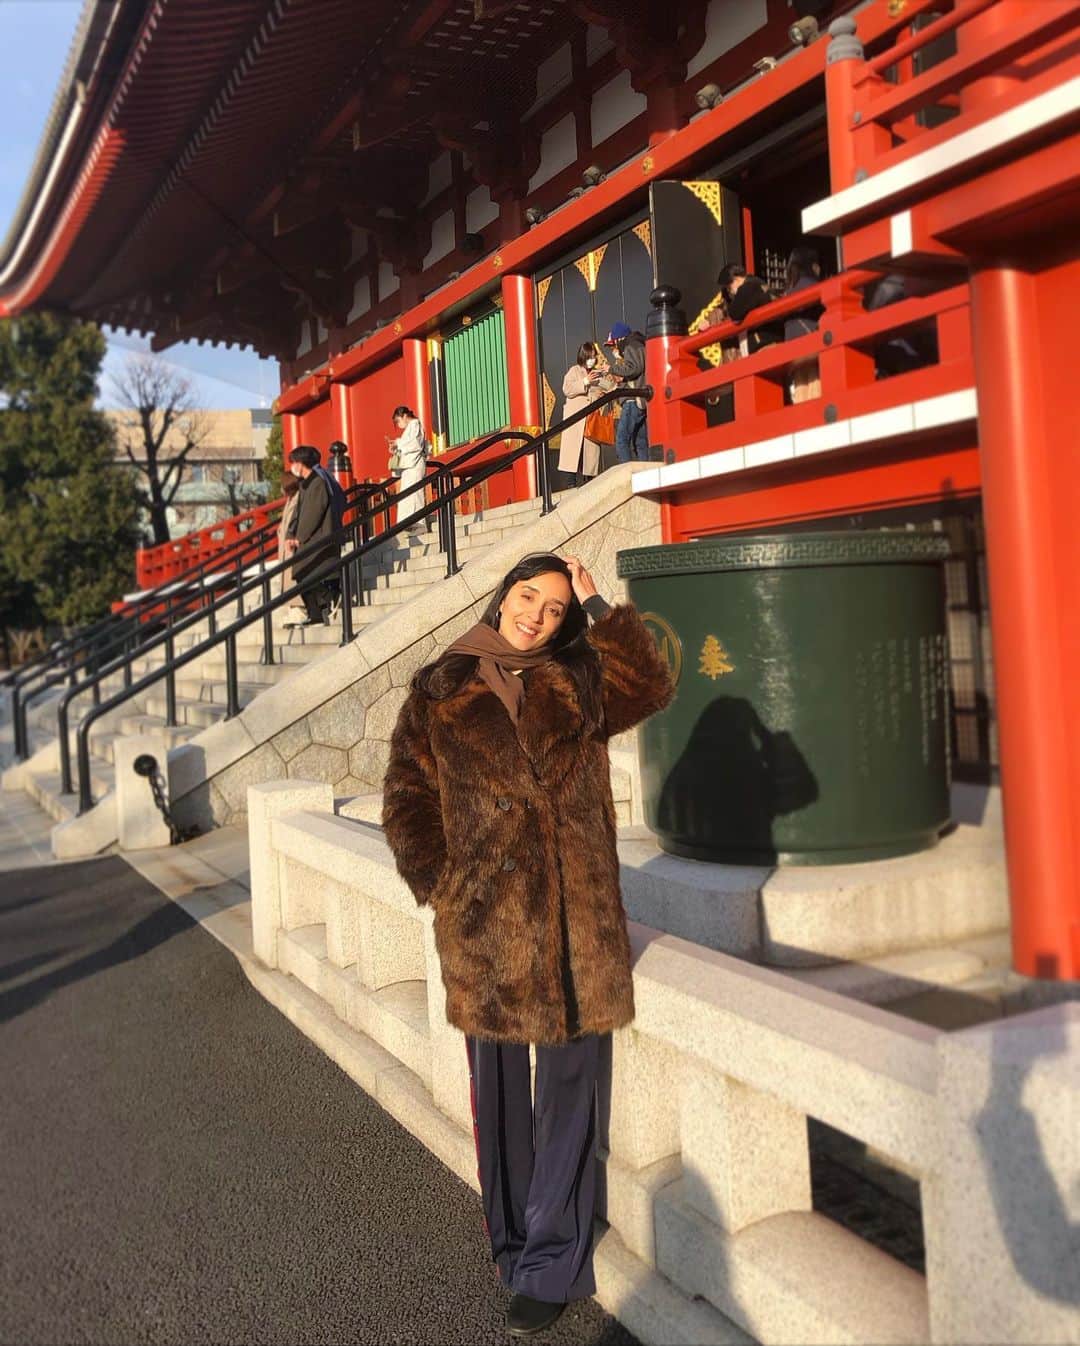 Jade Furutaのインスタグラム：「暖かくなってくれー東京! I’m pretty sure I’m a sunflower🌻 for reals. I need sunshine on me, it makes me happy and energetic☀️ God bring me spring soooon! This girl was made for warm weather! #rabbityear2023 #ilovesunshine #asakusa2023 #観光インフルエンサー #tokyolife #sensojitemple」